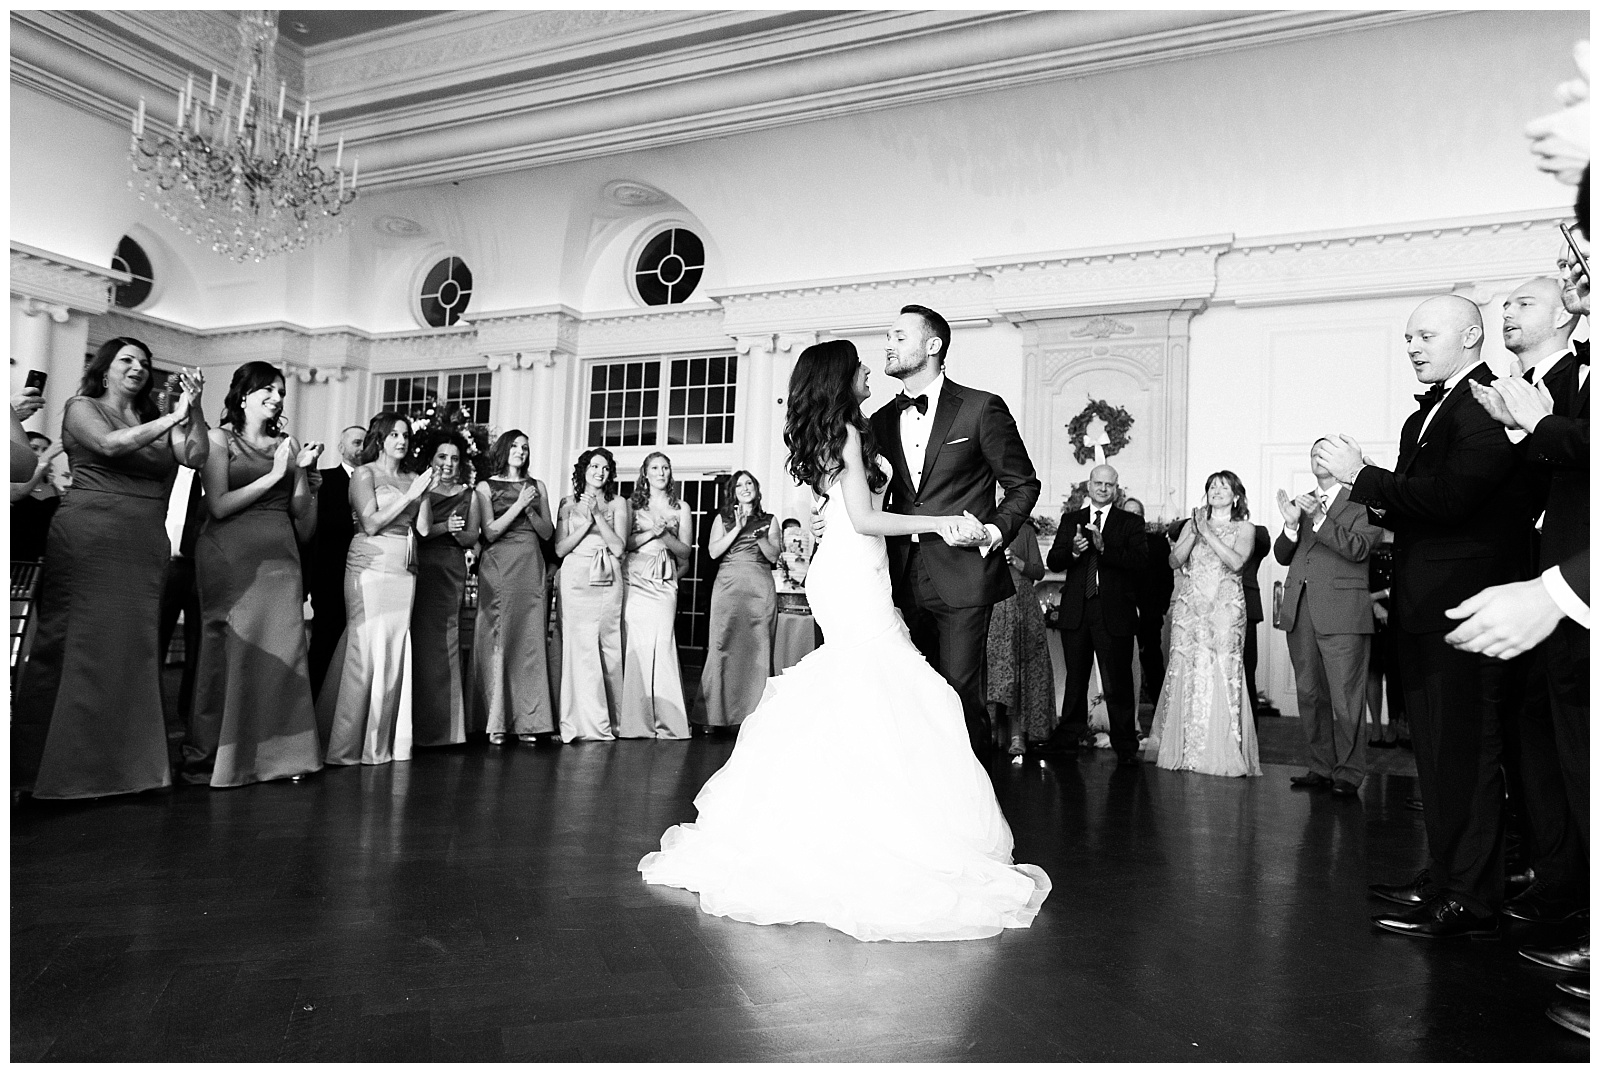 Park Chateau Wedding, Photographer, New Jersey, NJ, Winter, Reception, Ballroom, First Dance, Bride and Groom, Black and White